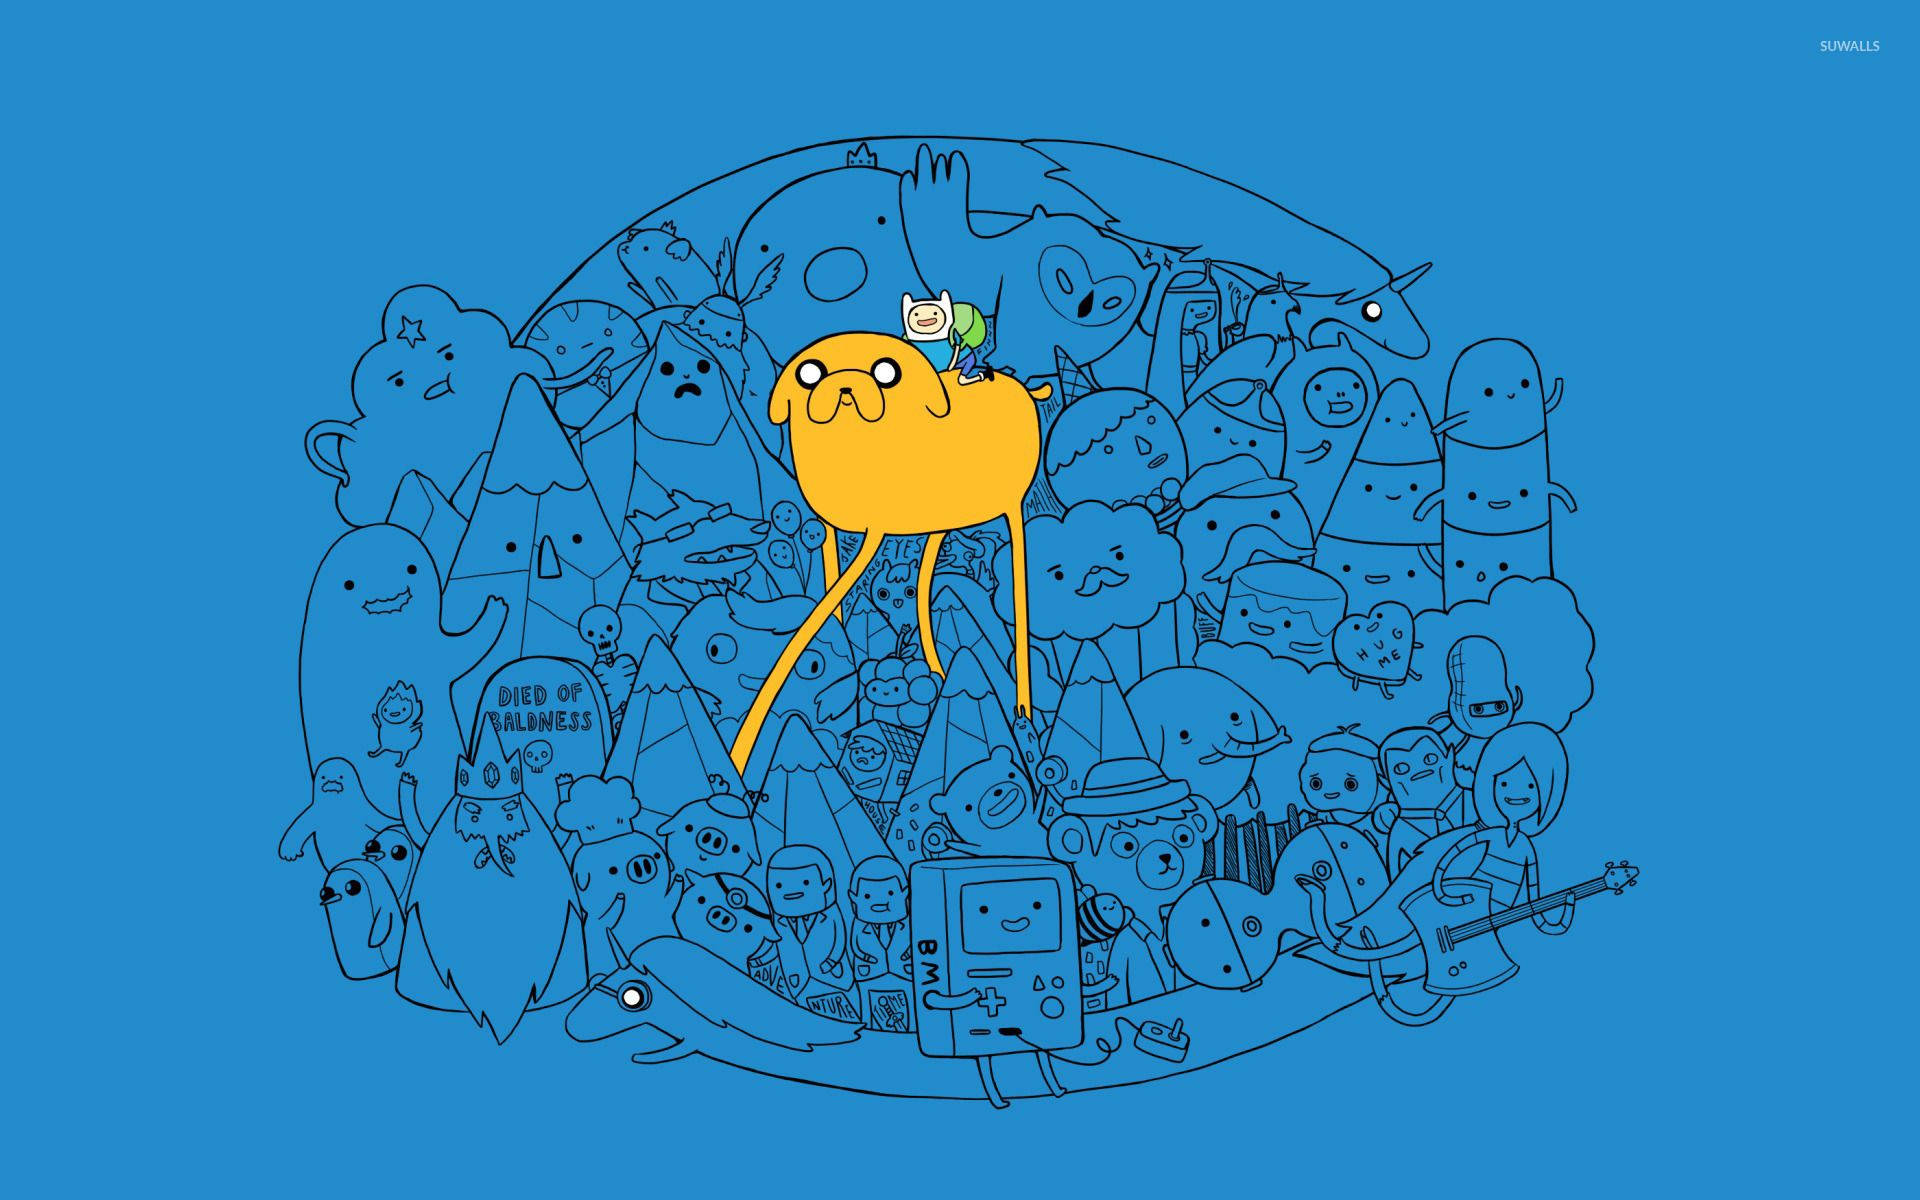 Join Finn and Jake, the heroes of Adventure Time, on their colorful and magical adventures! Wallpaper